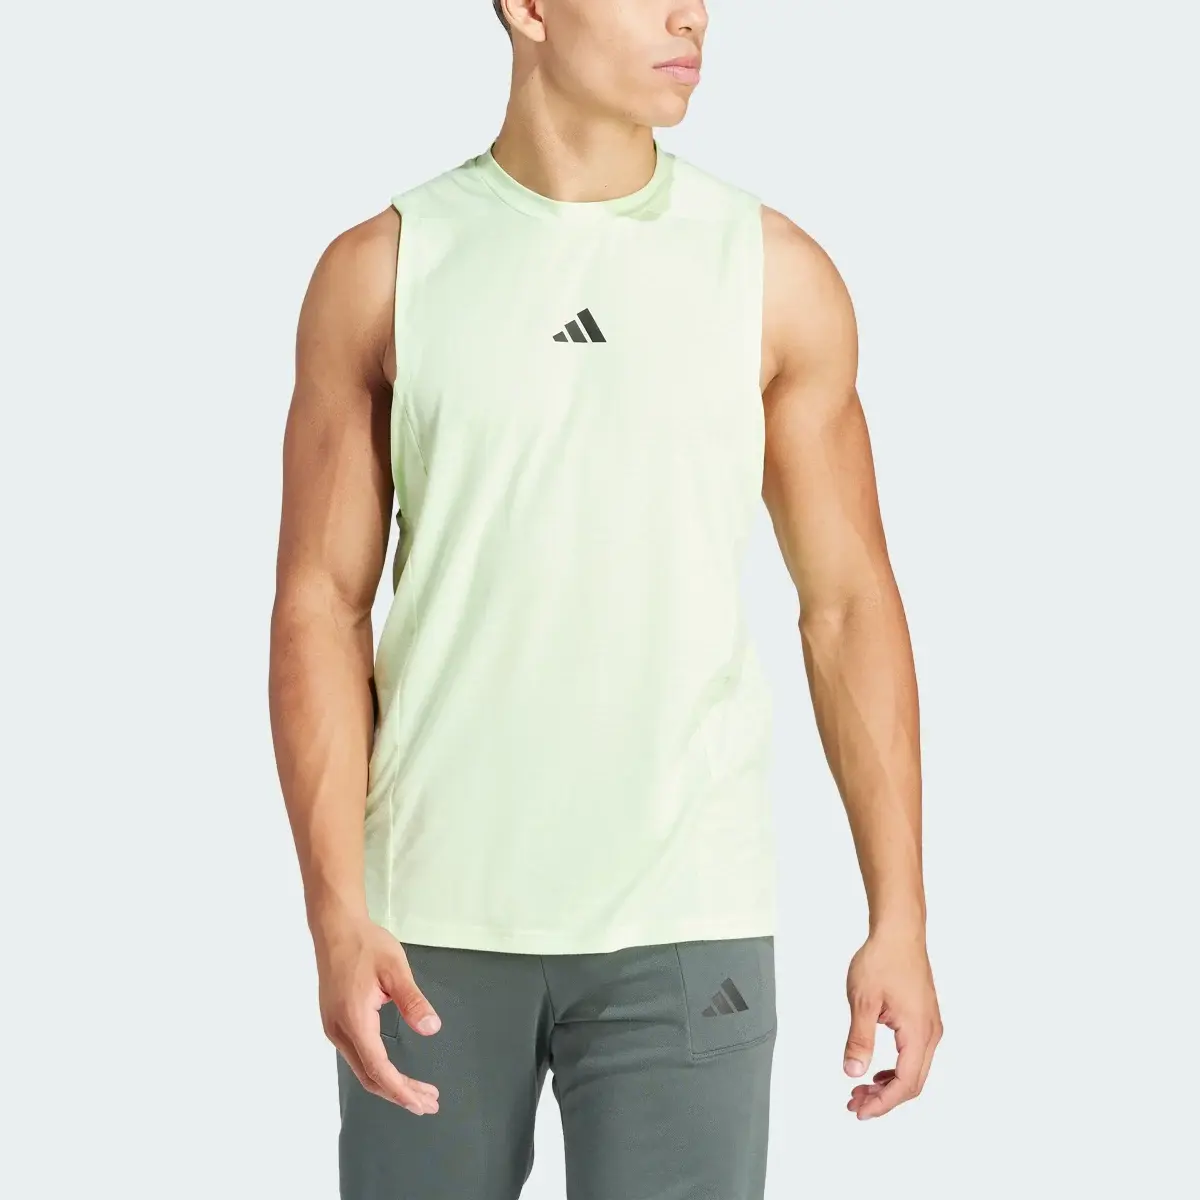 Adidas Designed for Training Workout Tank Top. 1